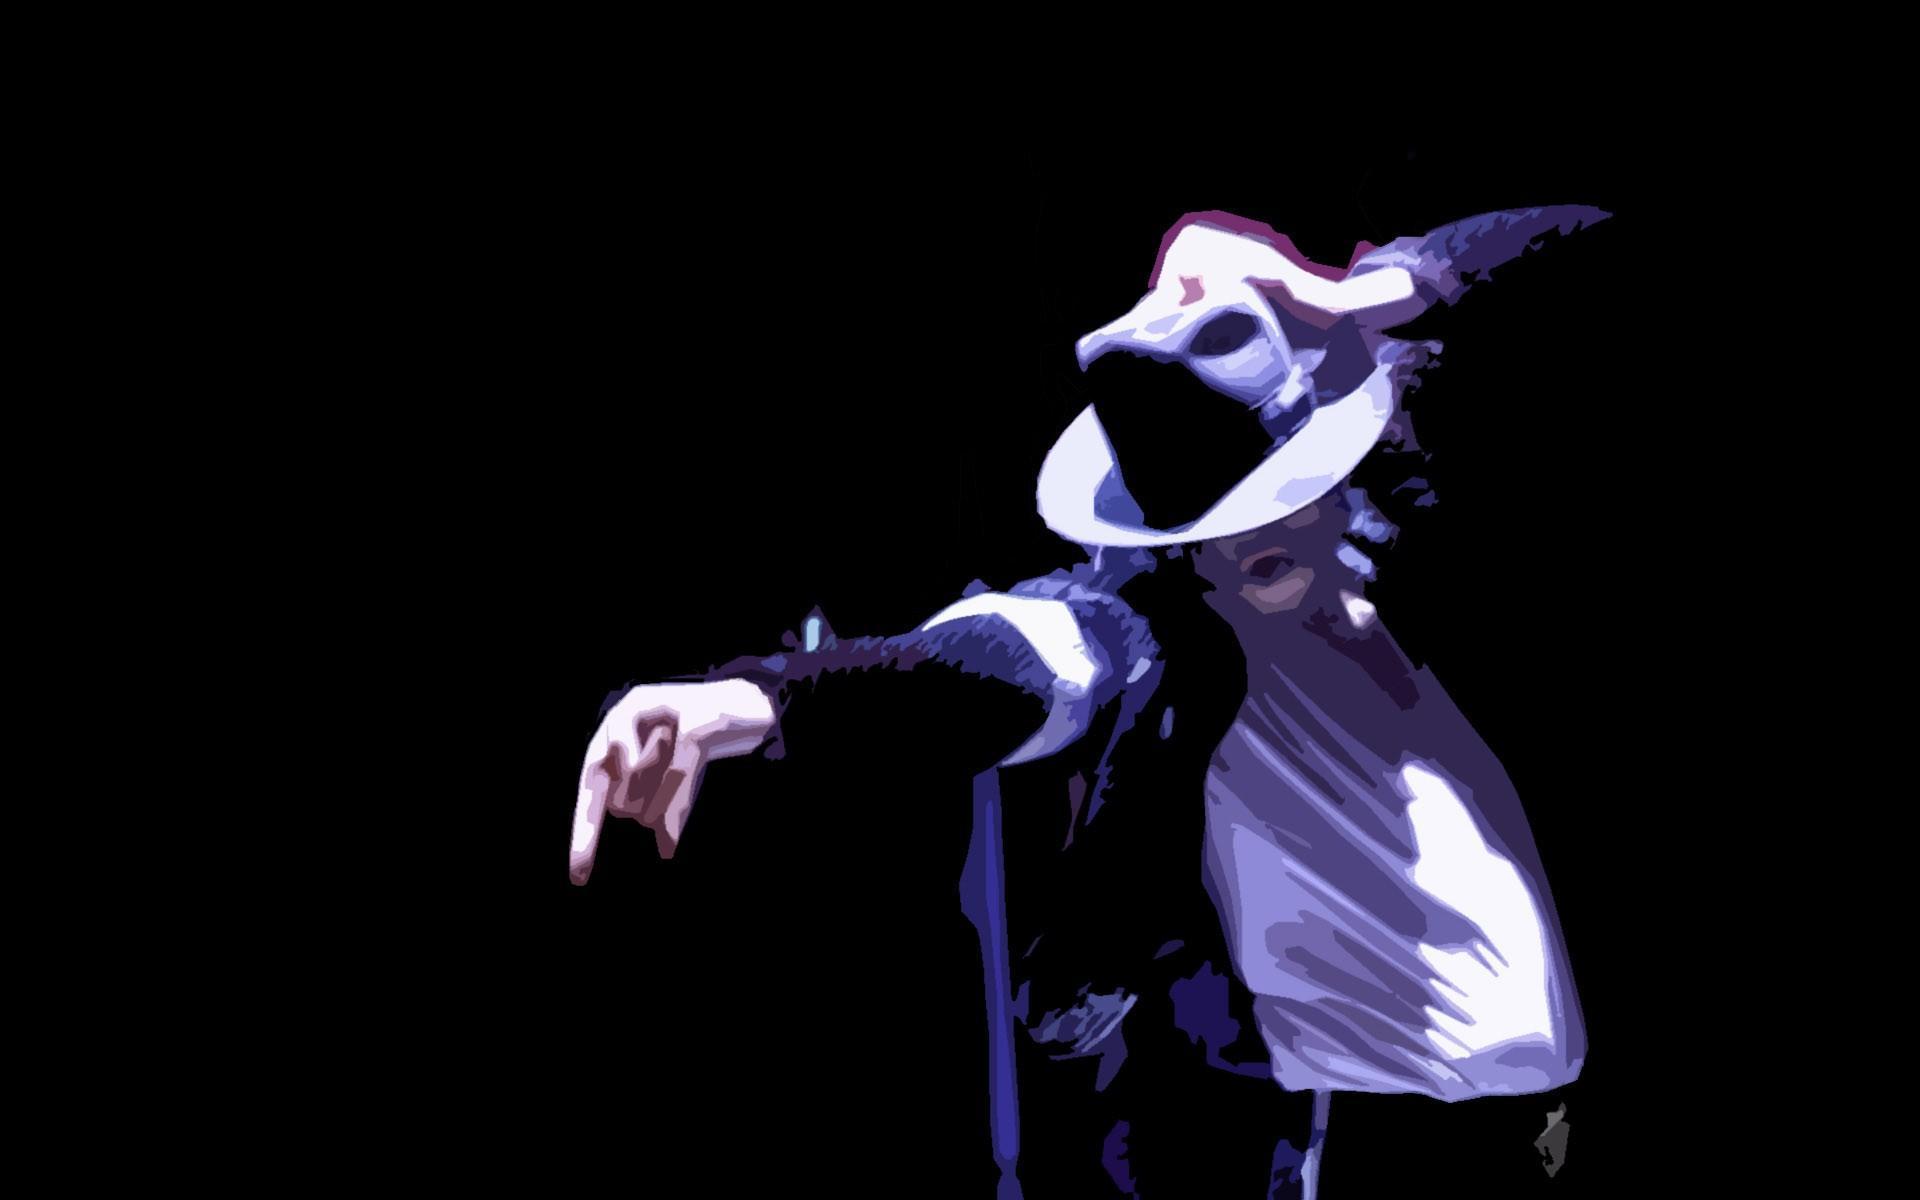 michael jackson images wallpapers #6